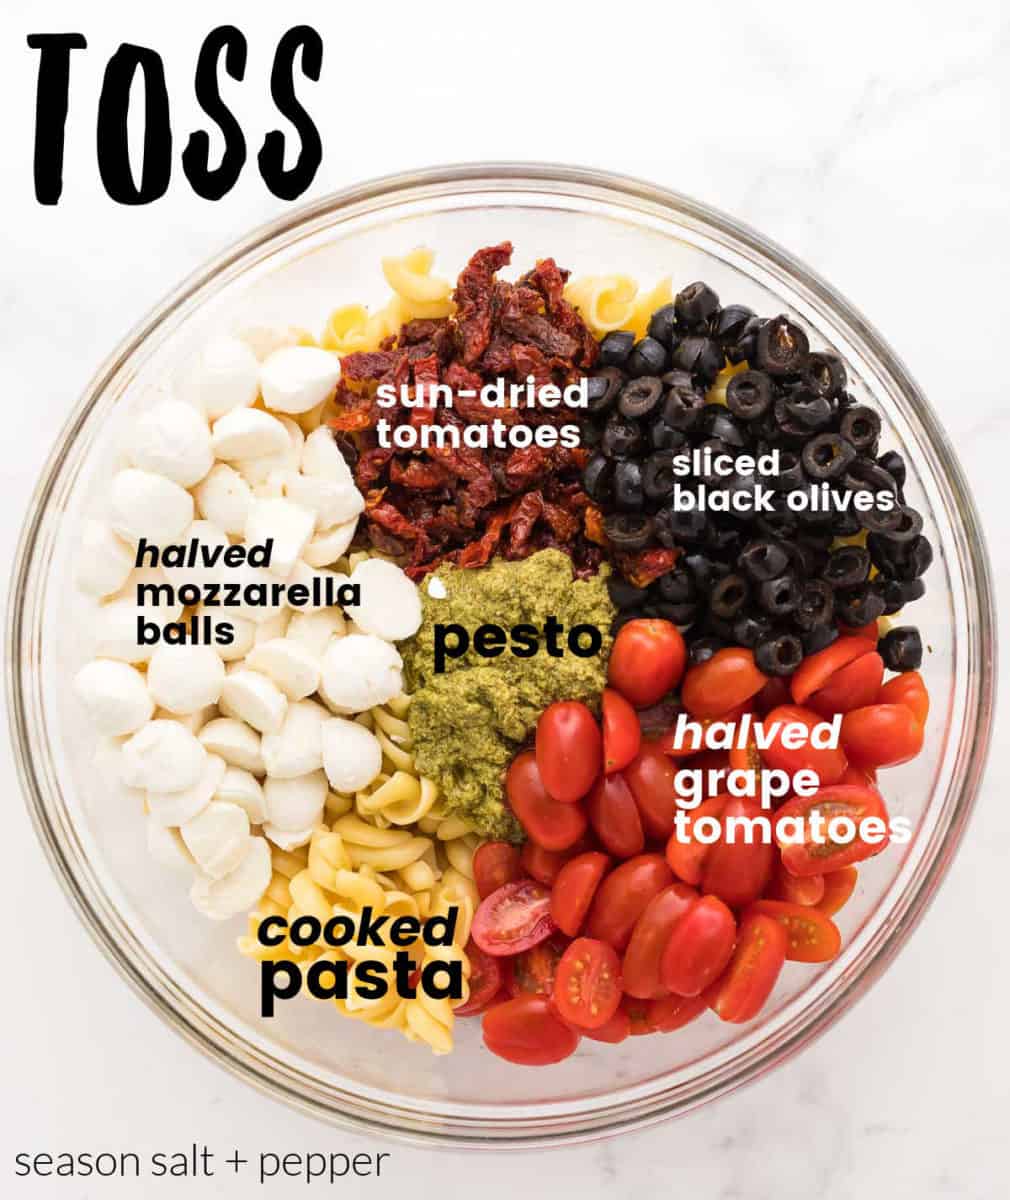 Step: toss pasta, pesto, halved tomatoes, halved tomatoes, sun-dried tomatoes, and sliced olives until well combined